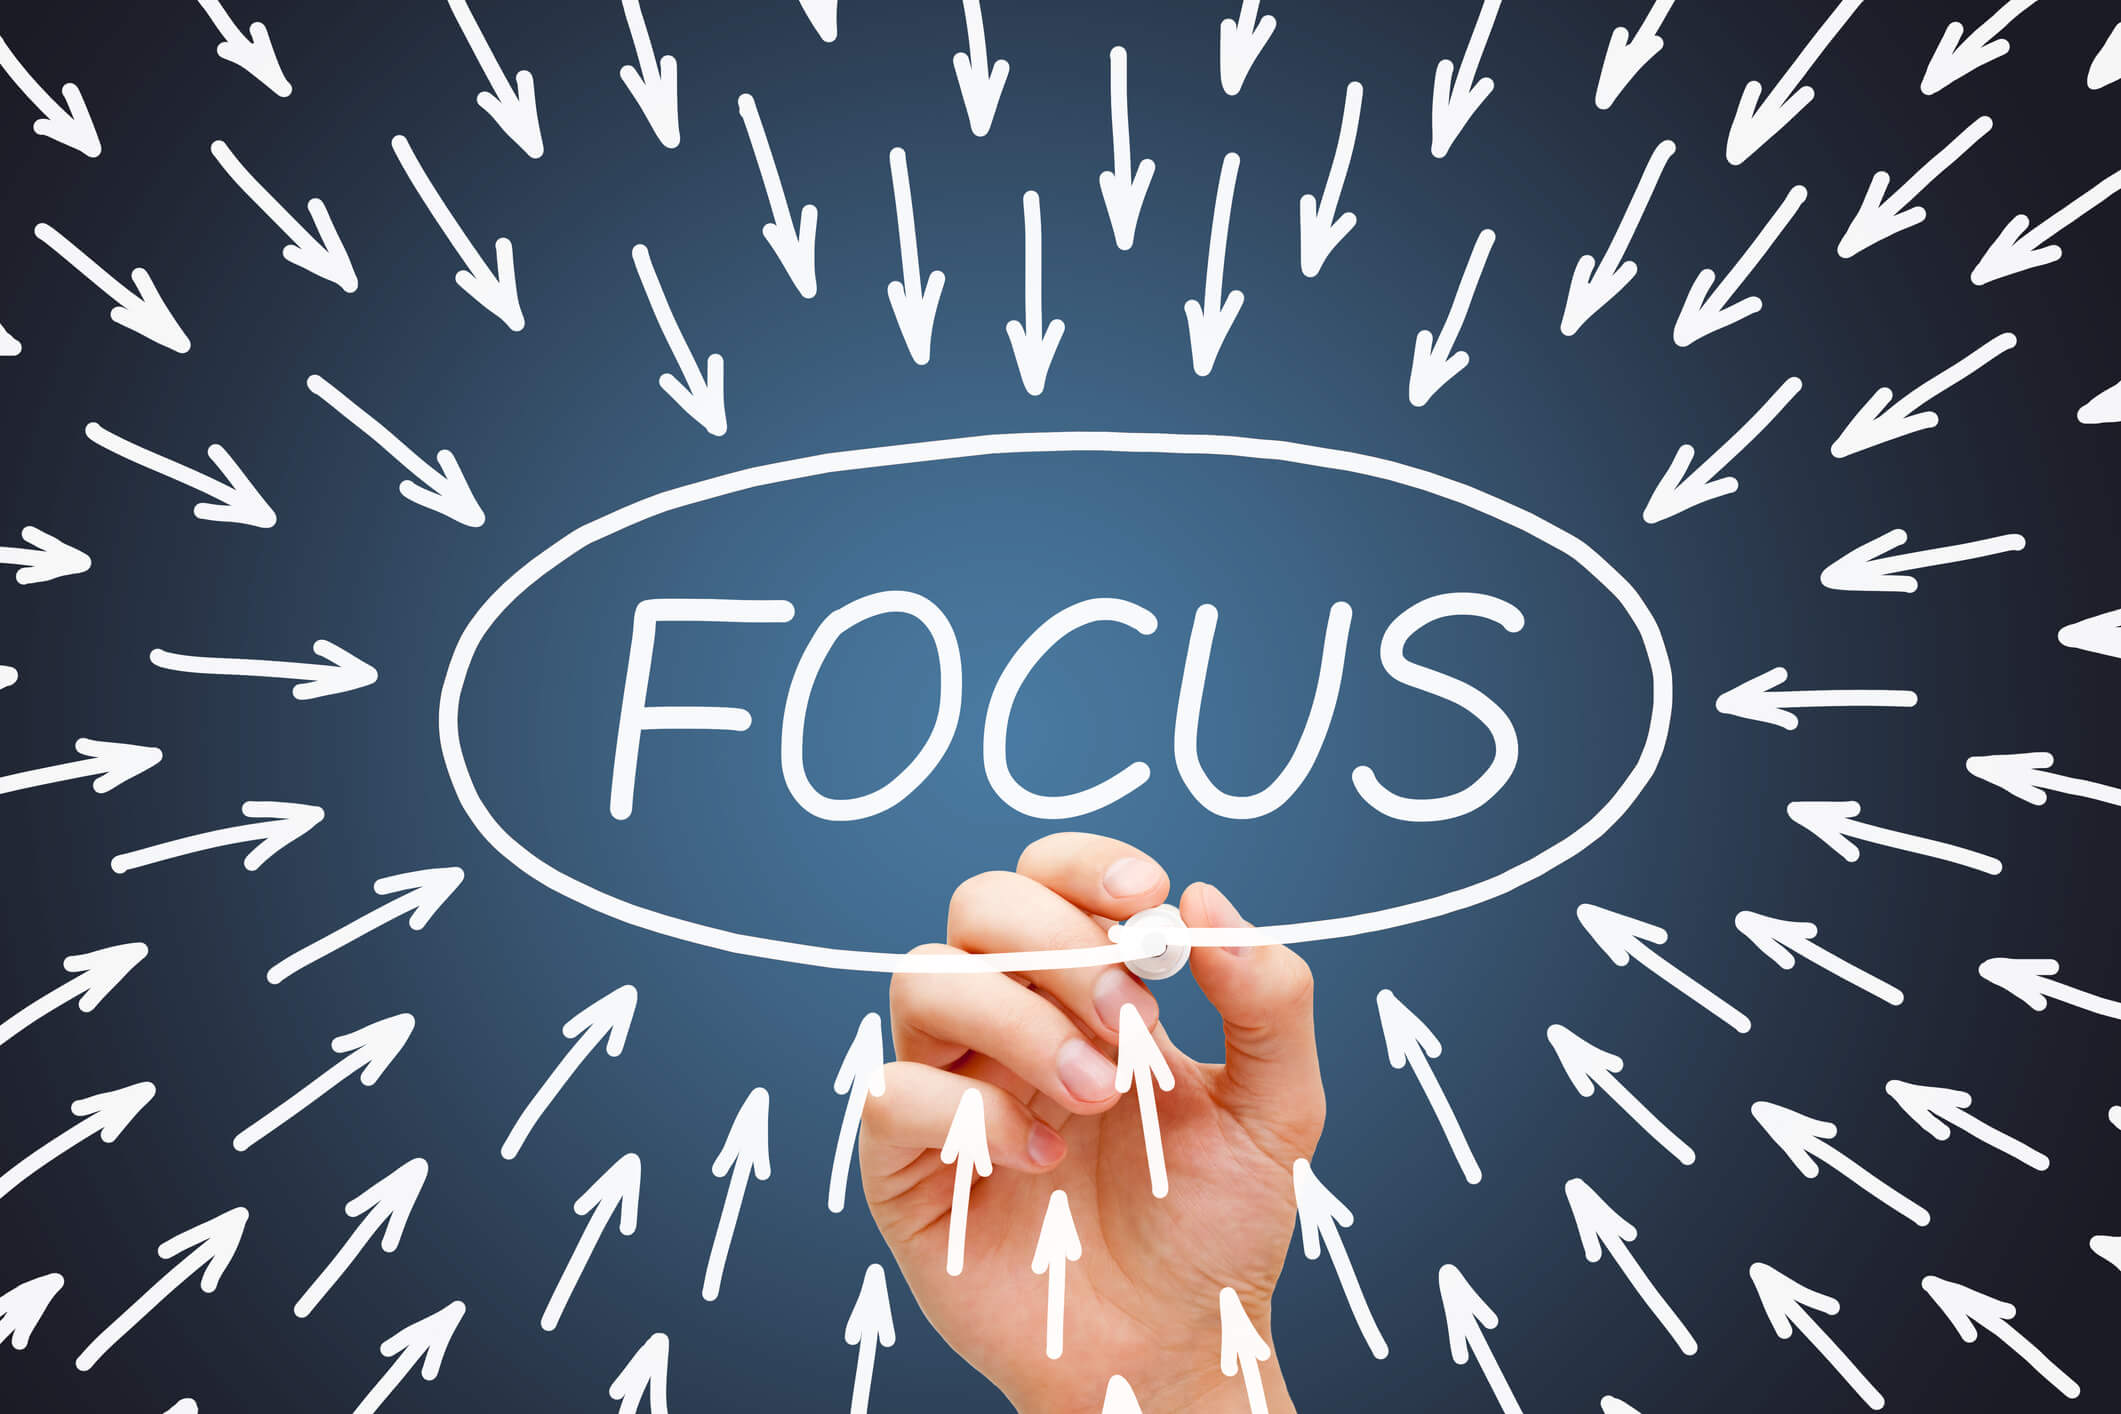 How to Become More Focused